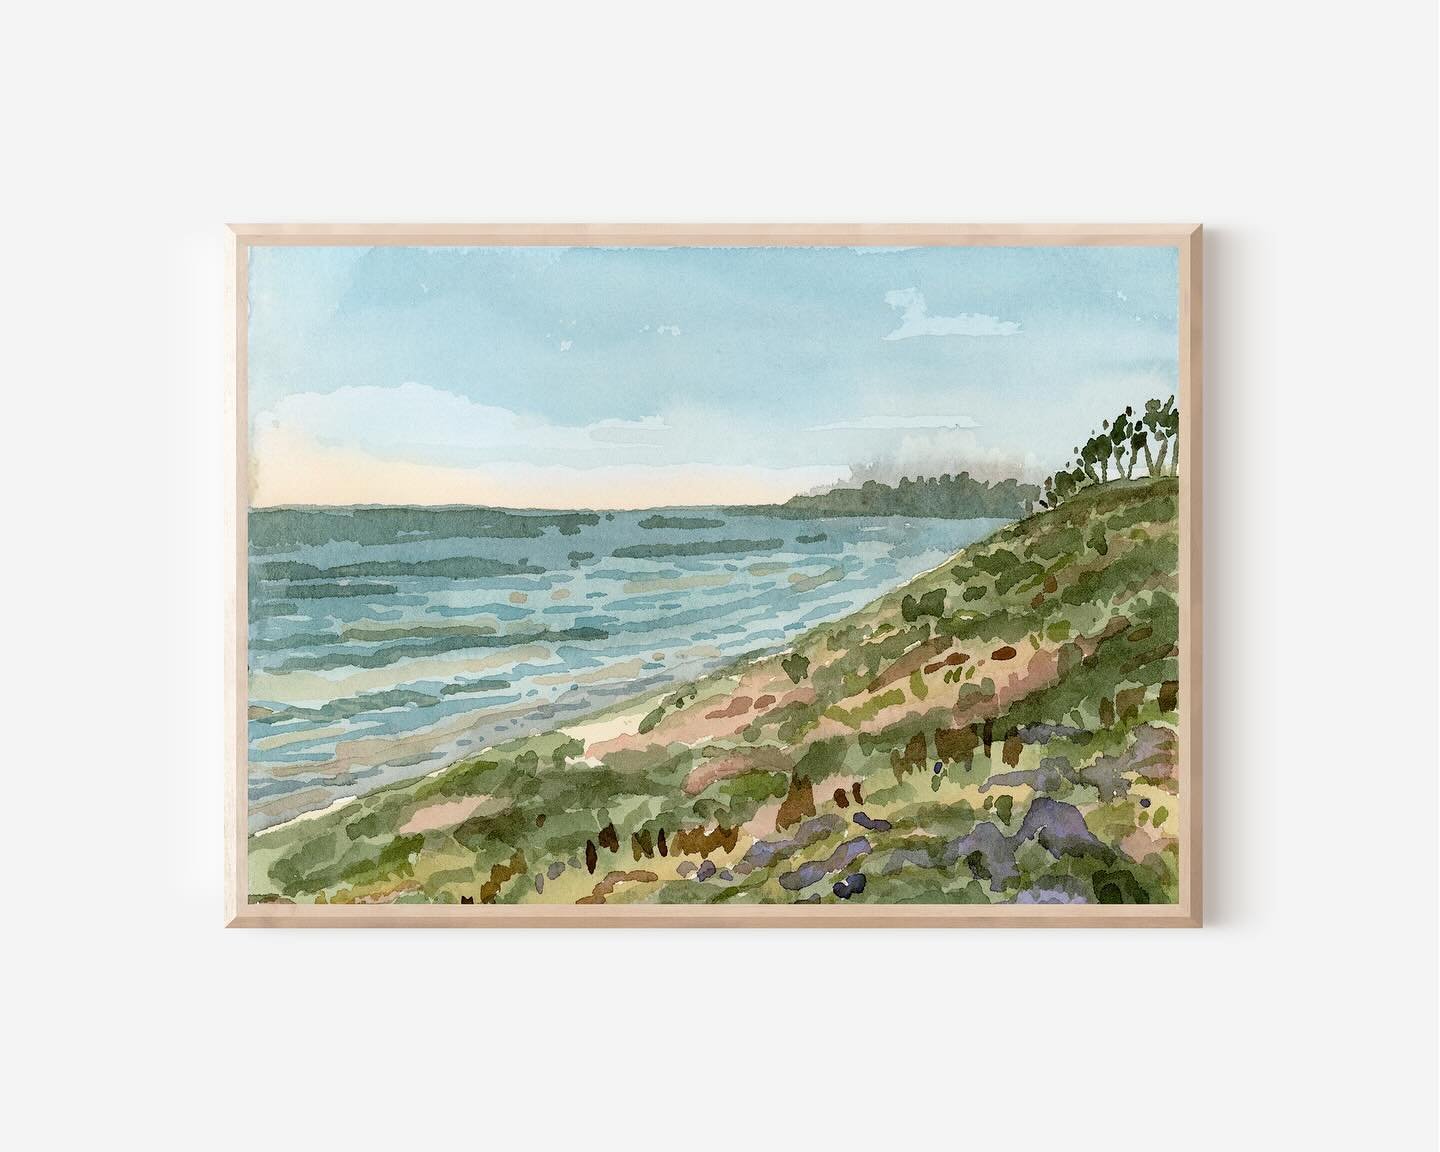 8 beautiful new prints have just been added to the shop! I have spent the last couple of weeks, scanning editing, and color, correcting 6 new coastal paintings and two new desert paintings from the Joshua tree collection to create the most beautiful 